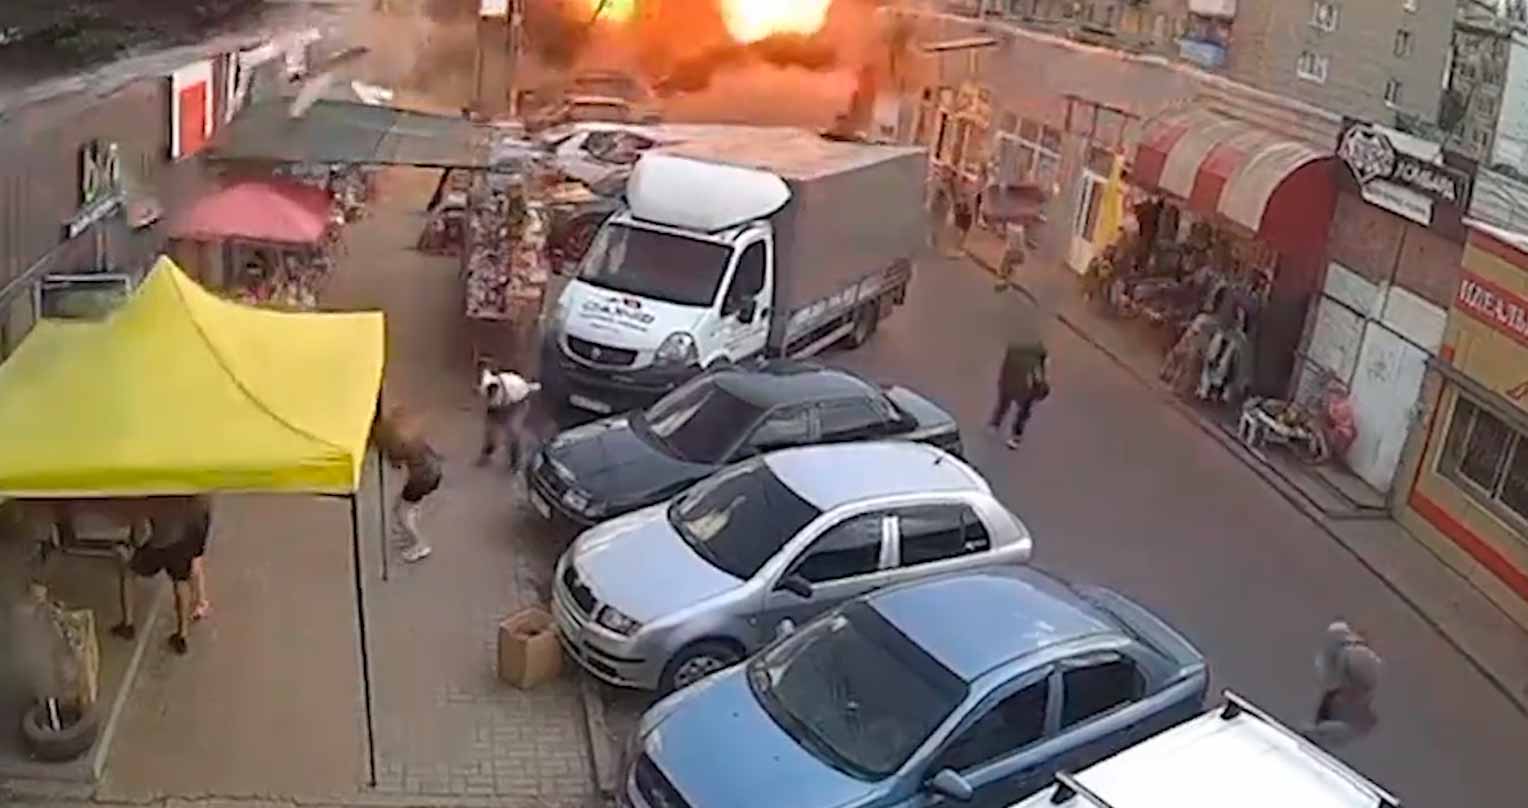 Video: See the moment a missile hits a market in Ukraine